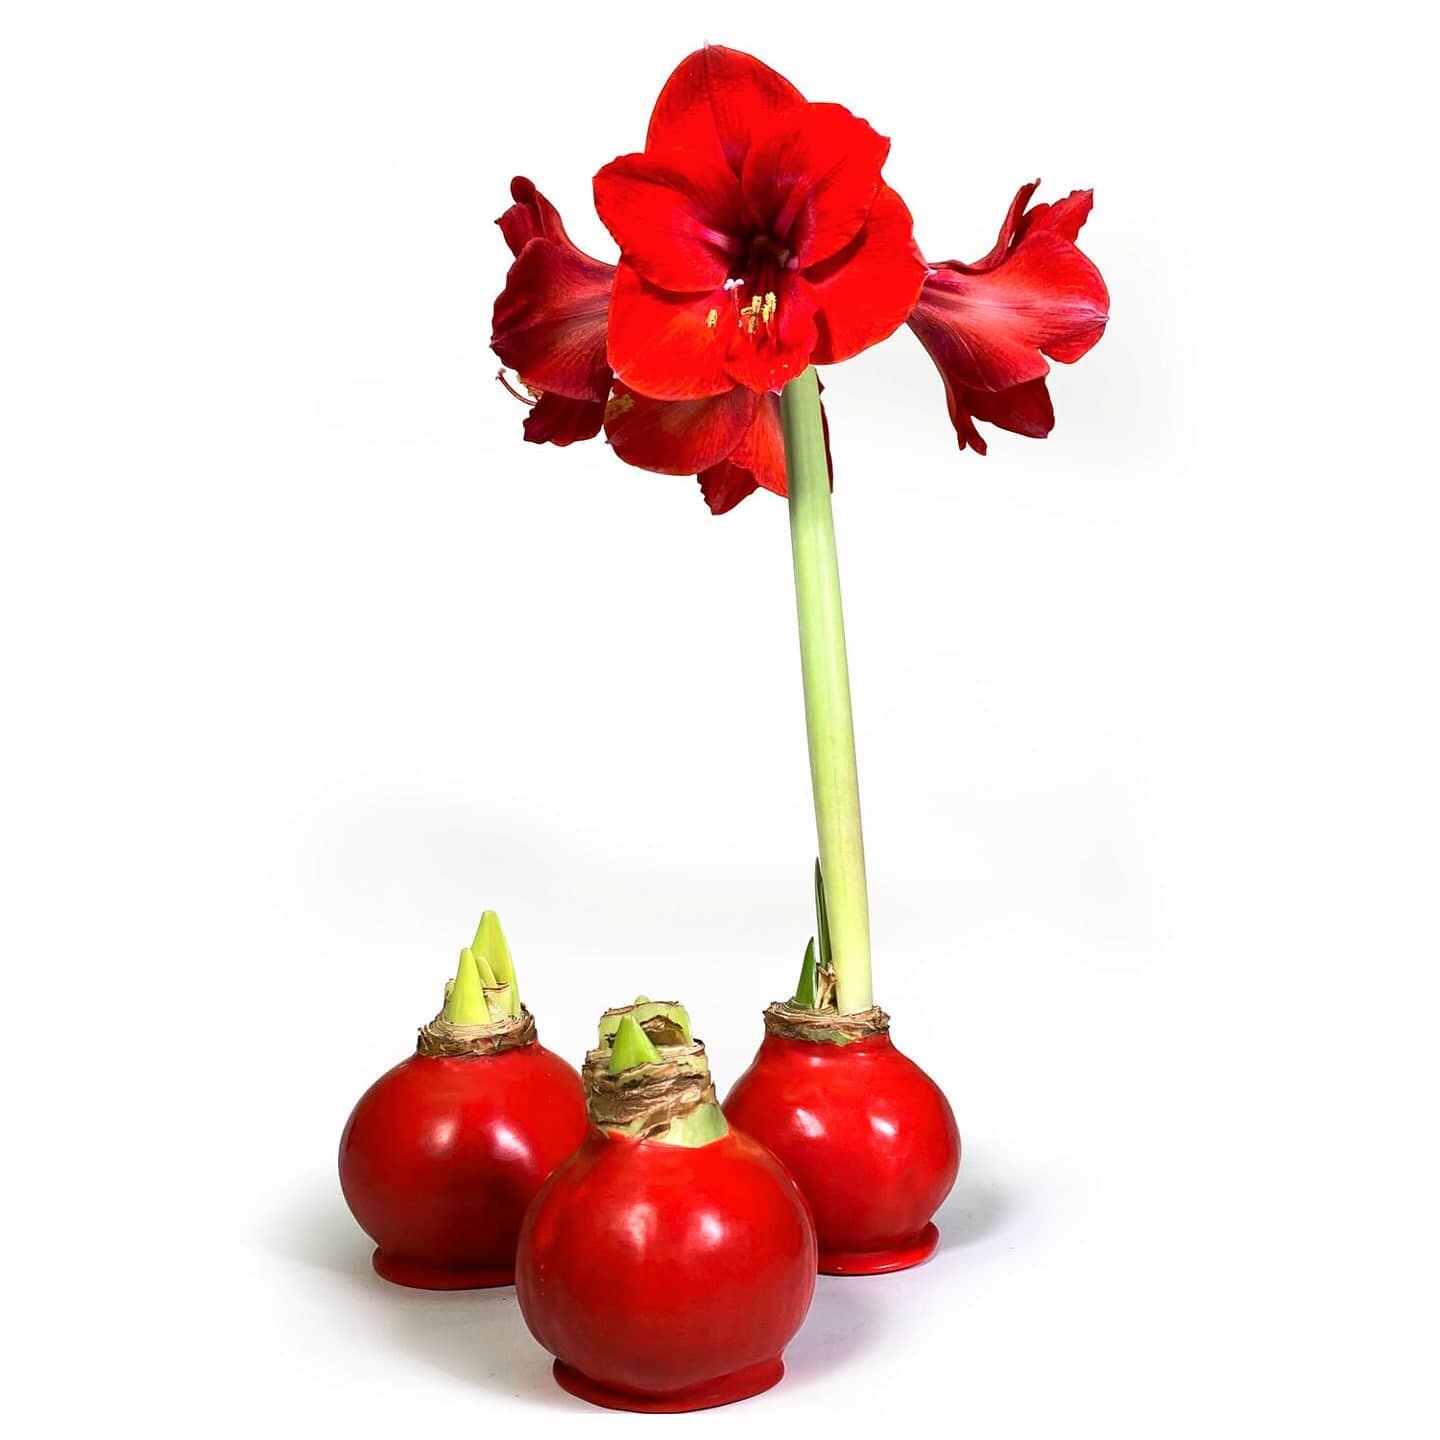 How To Care For Amaryllis Bulb In Wax Wax Amaryllis And Long Life Tulips FAQ Top 3